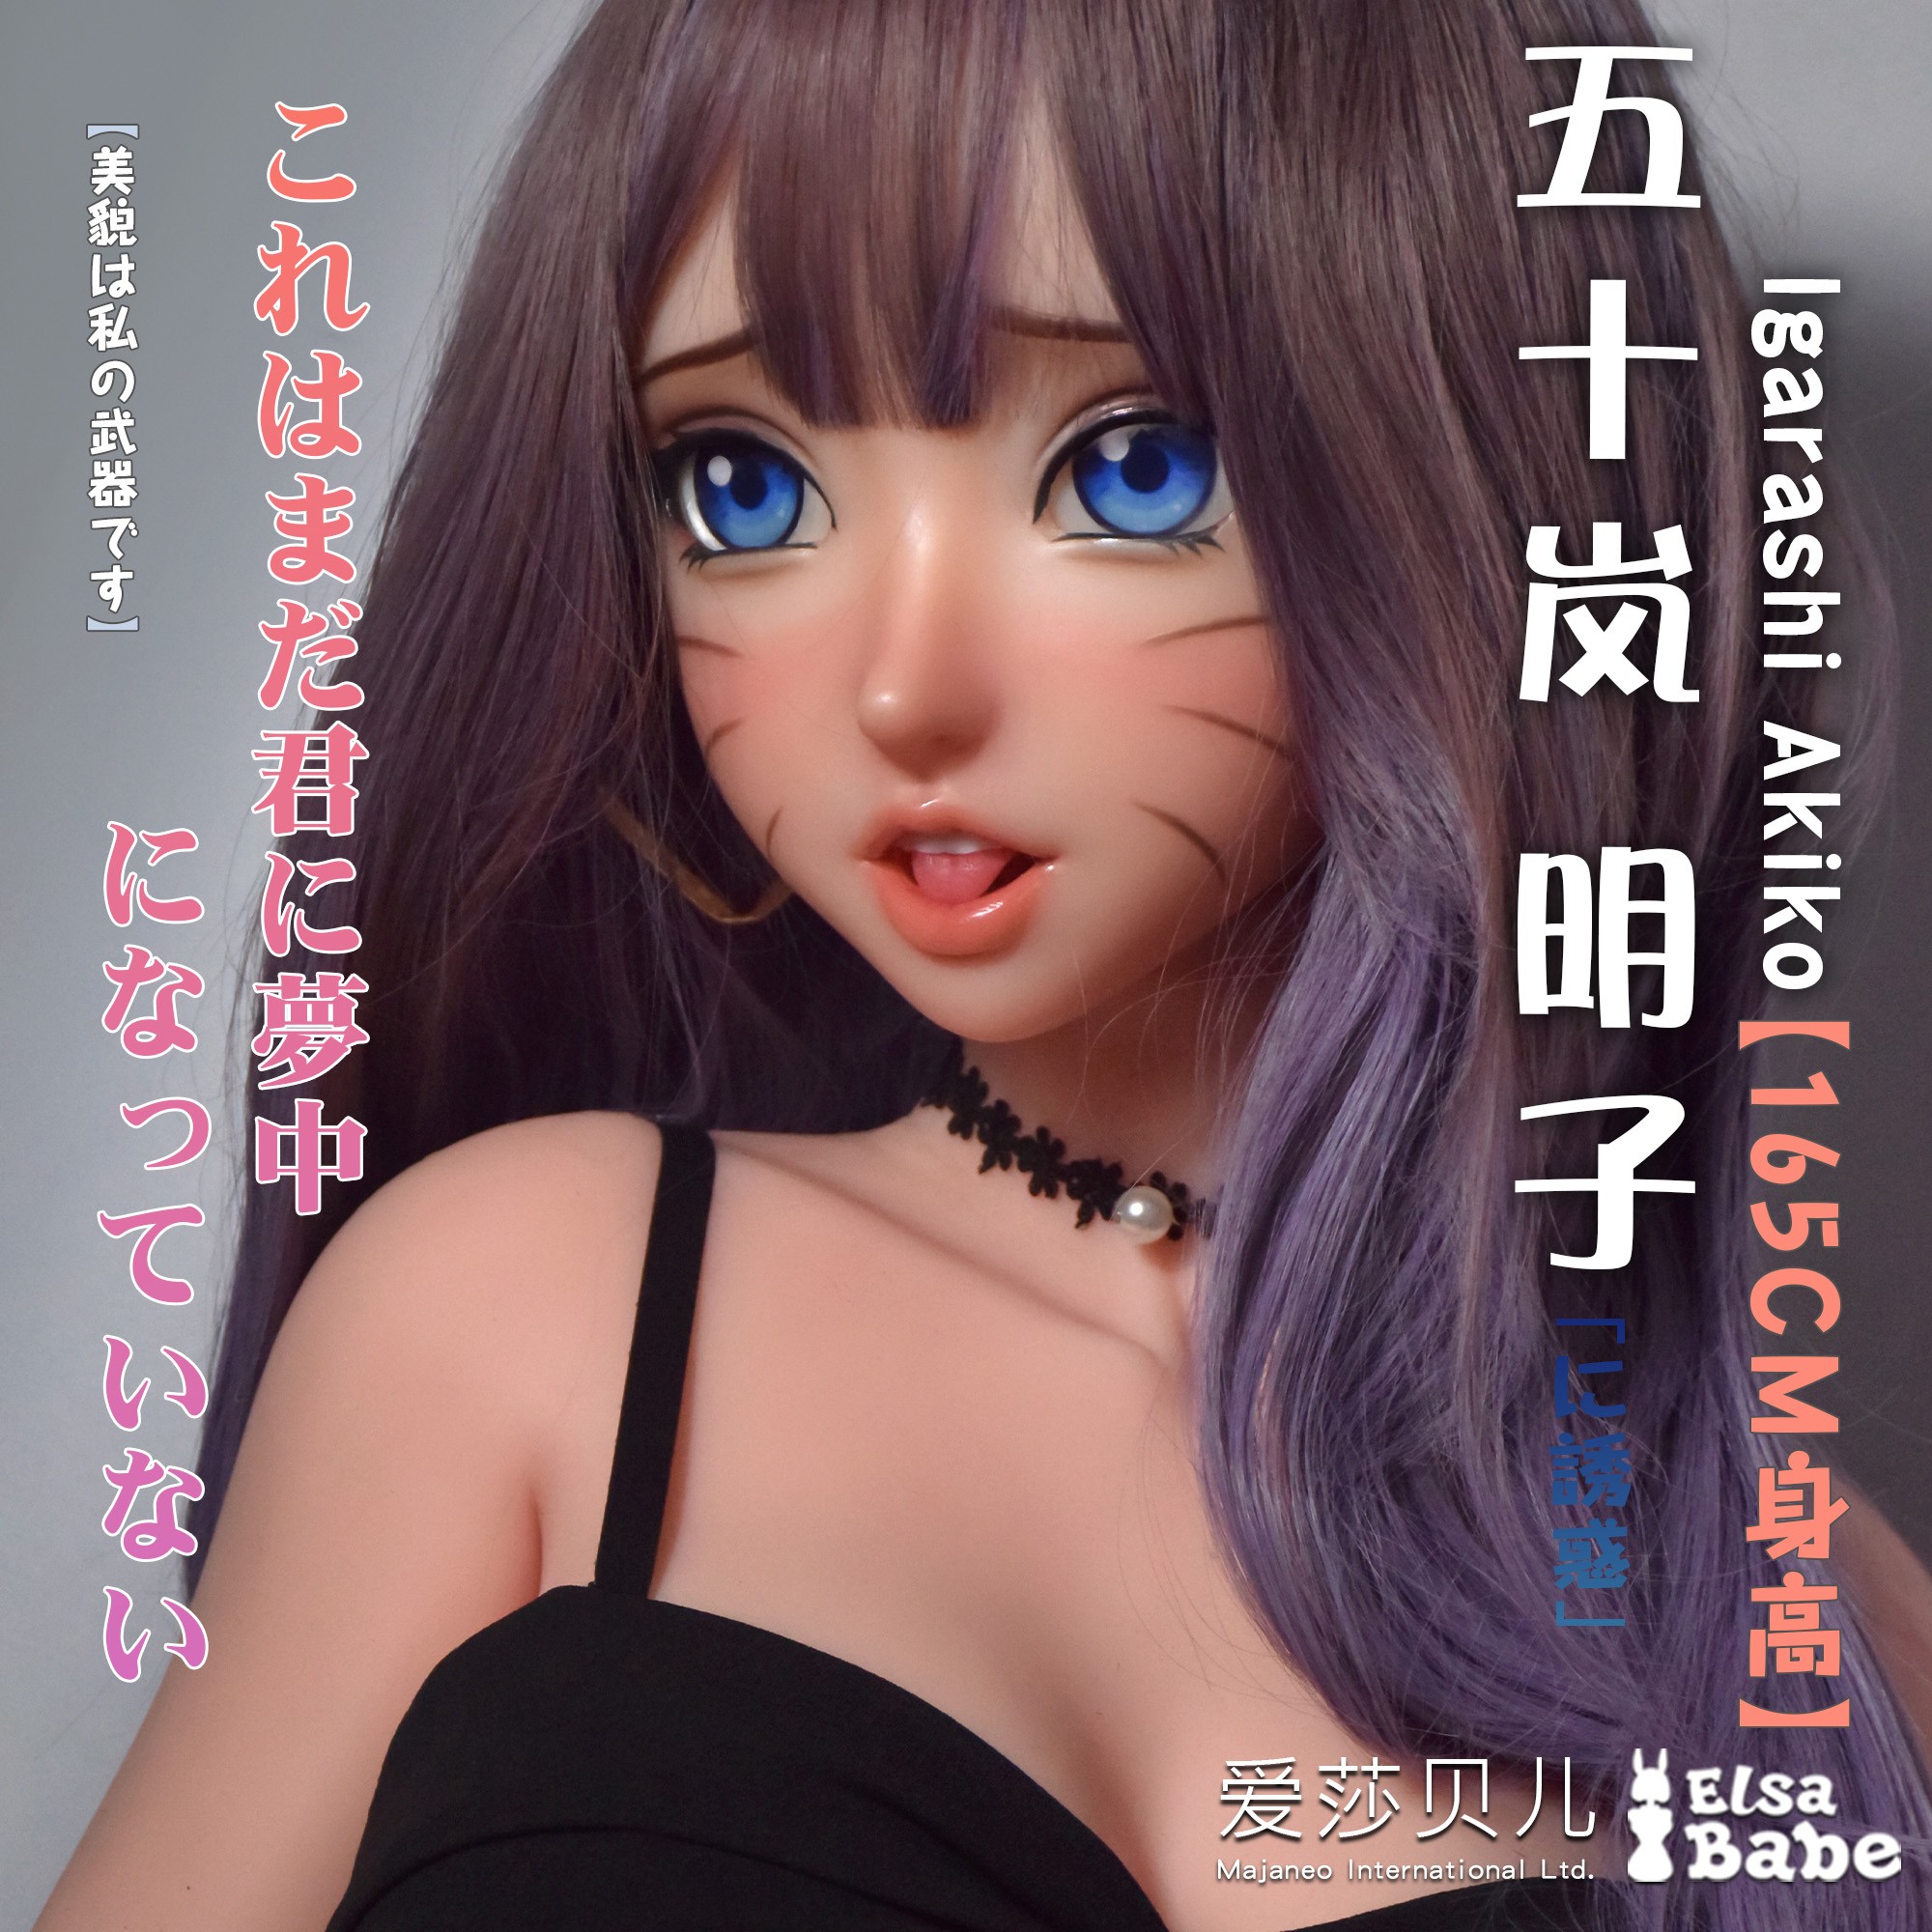 ElsaBabe 160cm/165cm Big Breasts Platinum Silicone Sex Doll Anime Figure Body Real Solid Erotic Toy with Metal Skeleton, Igarashi Akiko